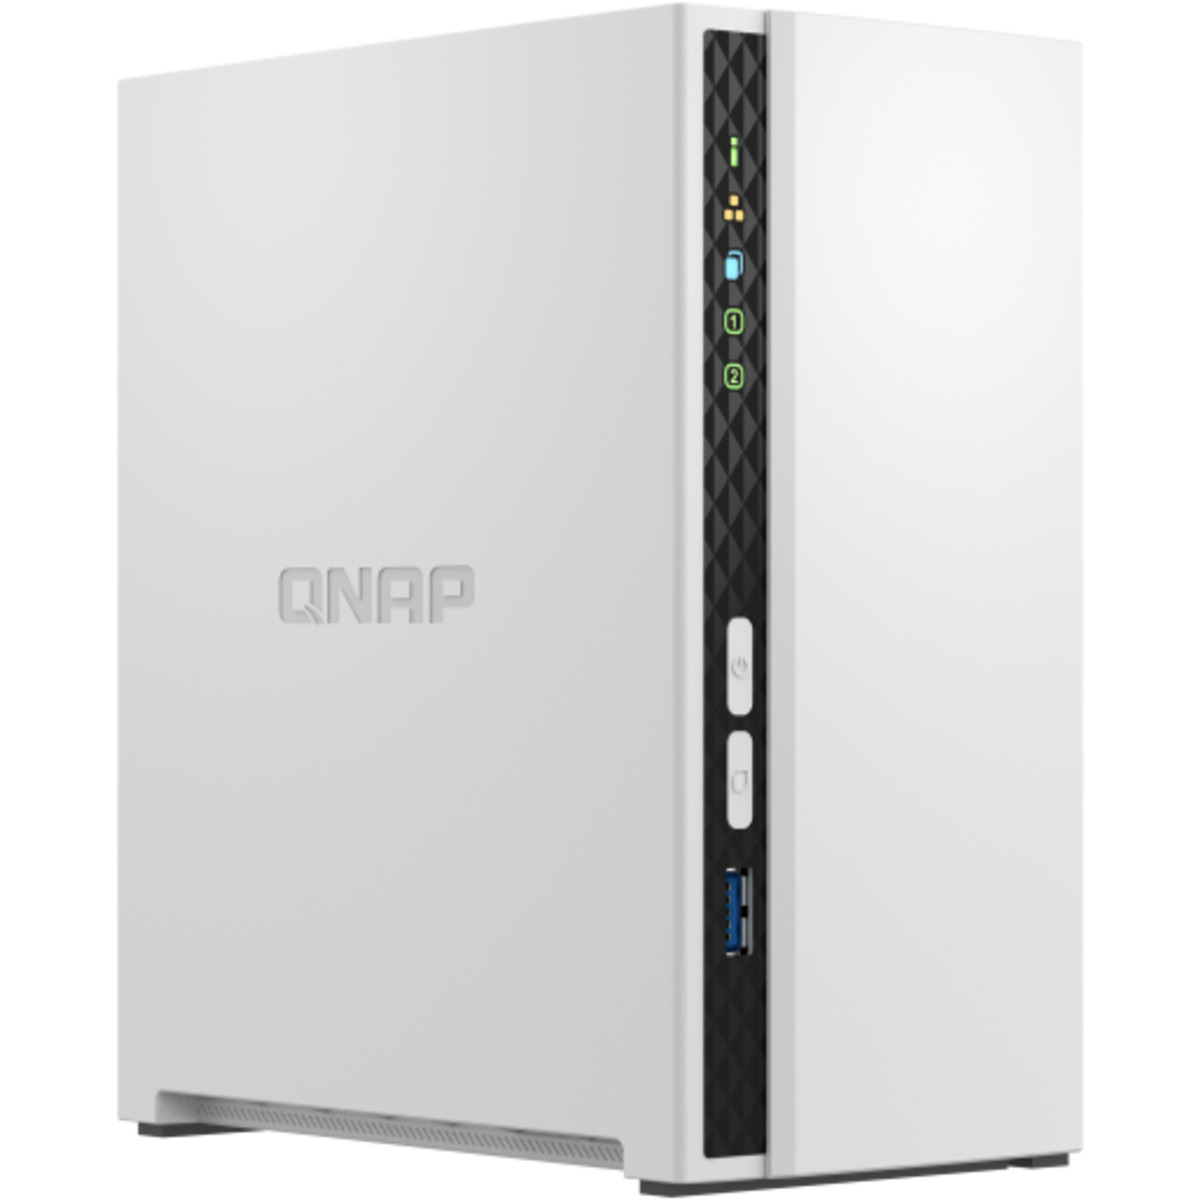 QNAP TS-233 10tb 2-Bay Desktop Personal / Basic Home / Small Office NAS - Network Attached Storage Device 1x10tb Seagate EXOS X18 ST10000NM018G 3.5 7200rpm SATA 6Gb/s HDD ENTERPRISE Class Drives Installed - Burn-In Tested TS-233